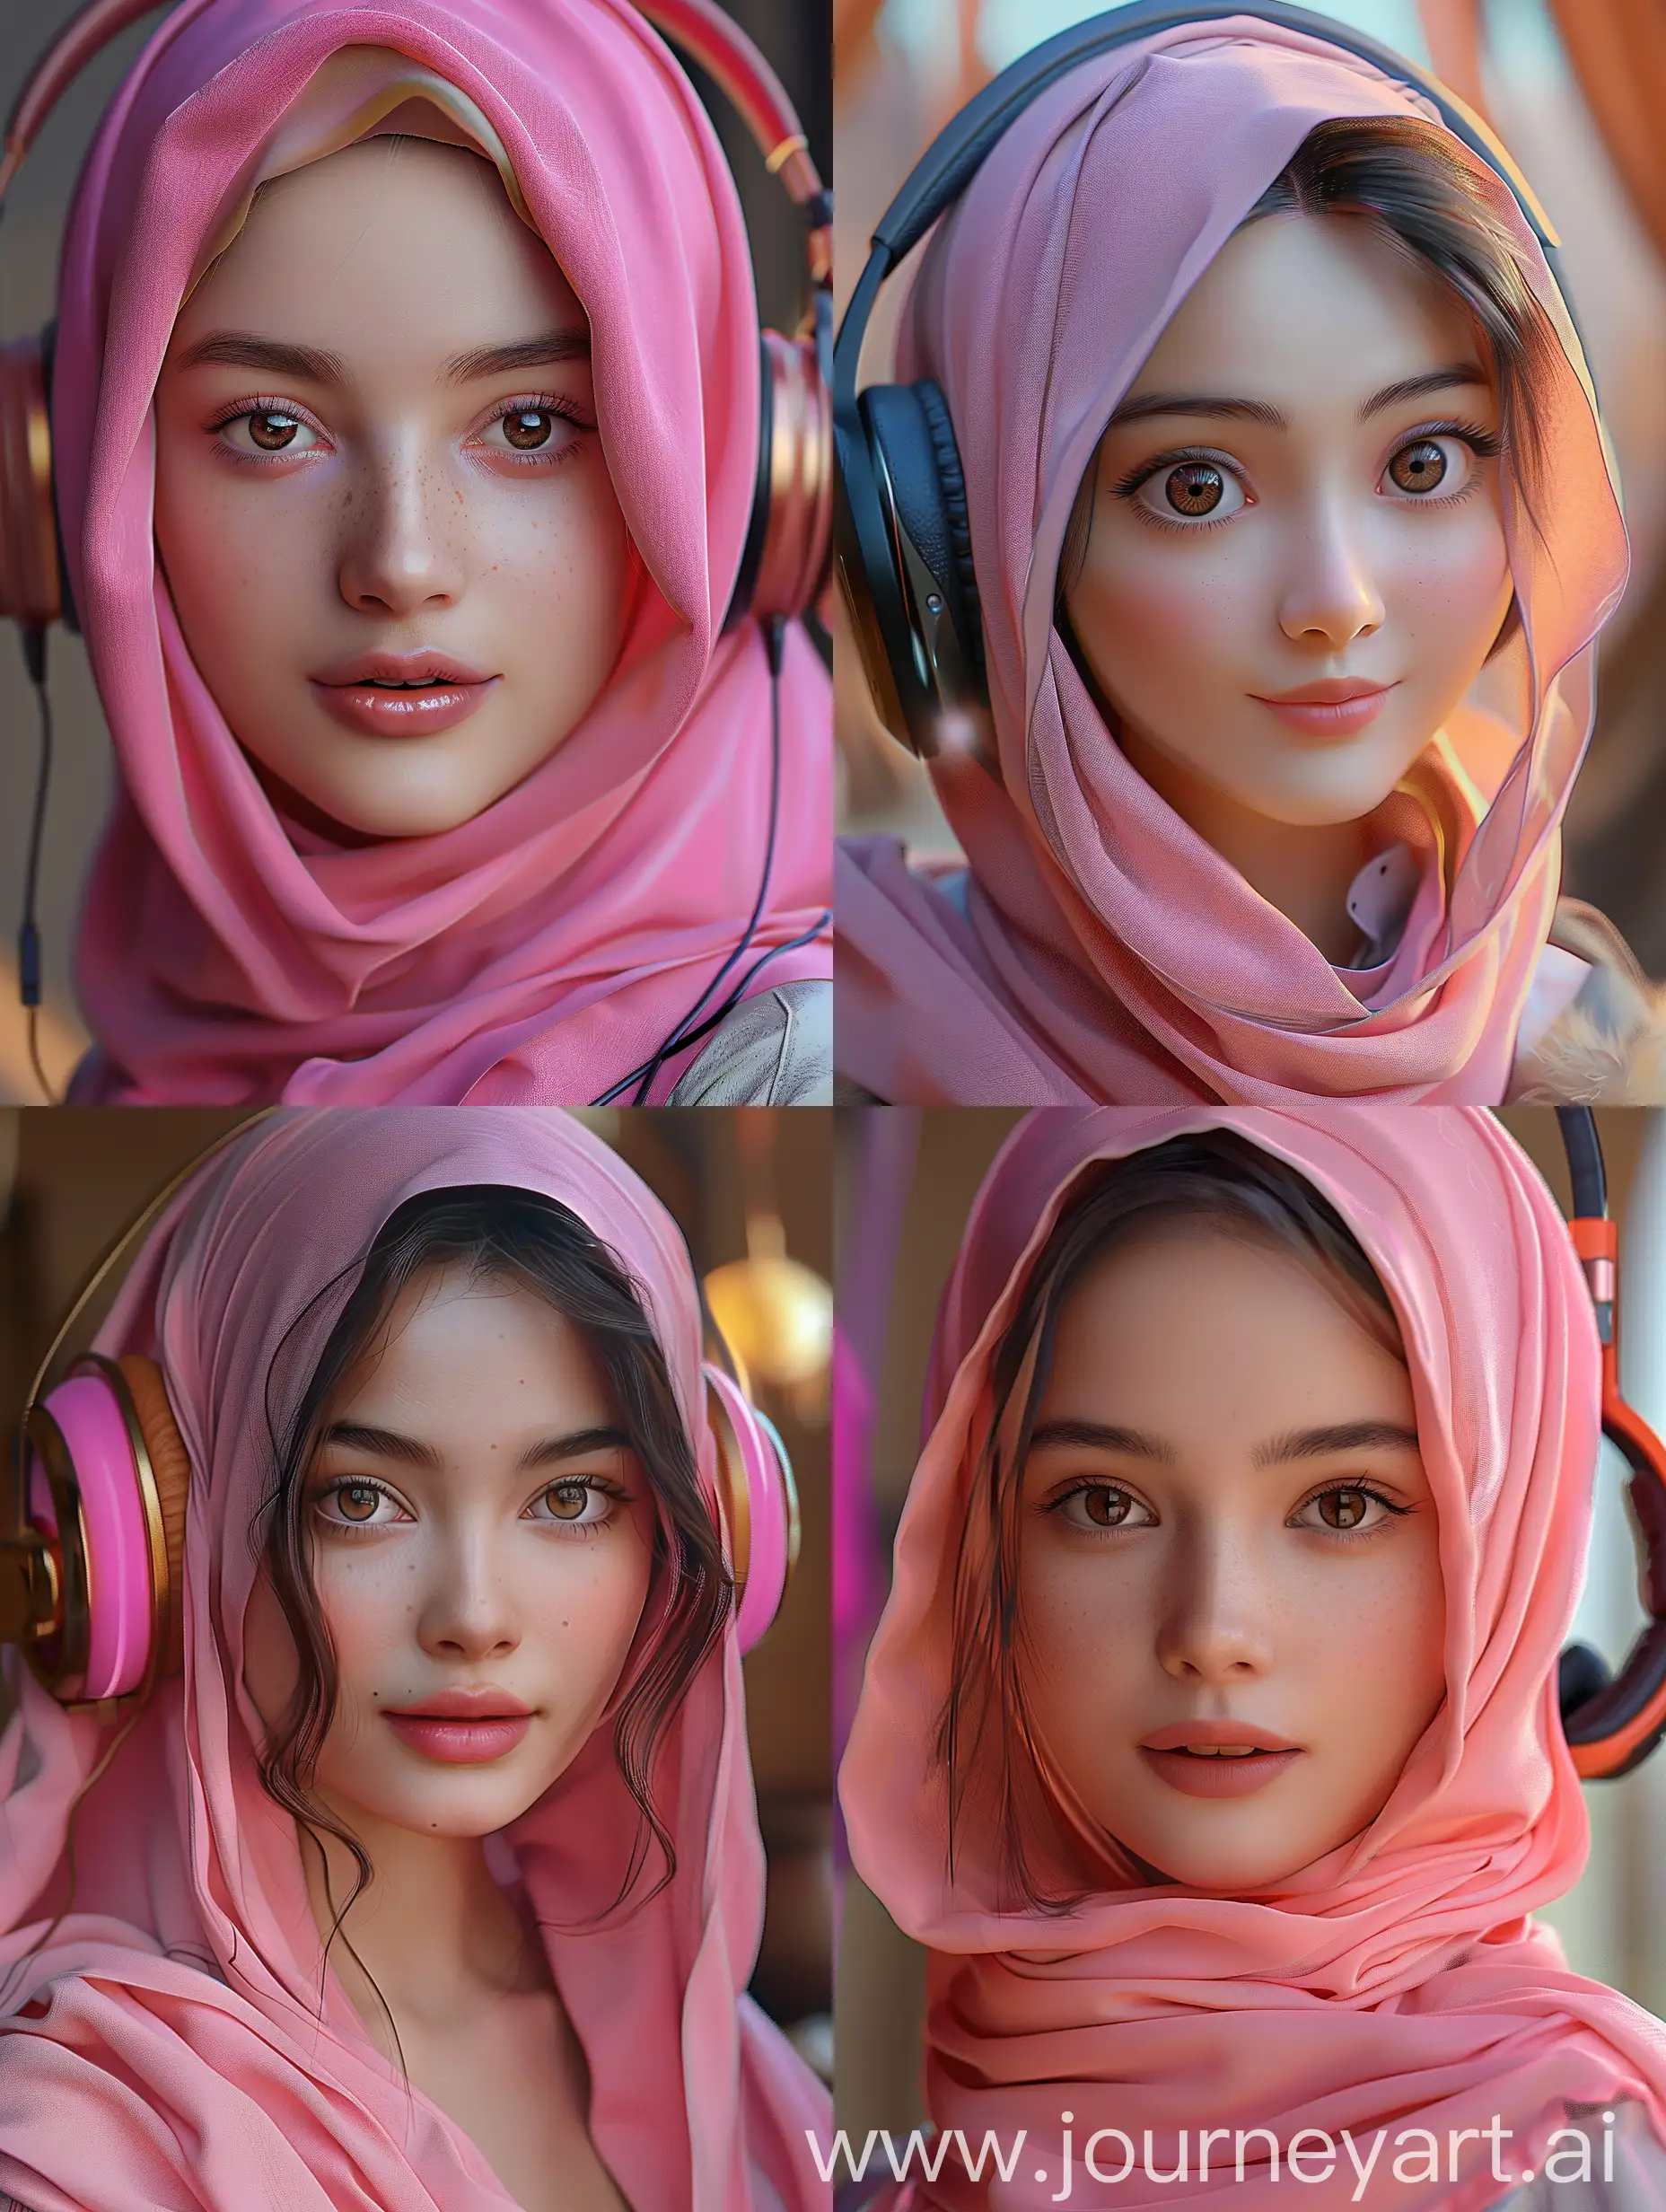 Smiling-Woman-in-Pink-Hijab-Disney-Pixar-Style-Portrait-with-Natural-Lighting